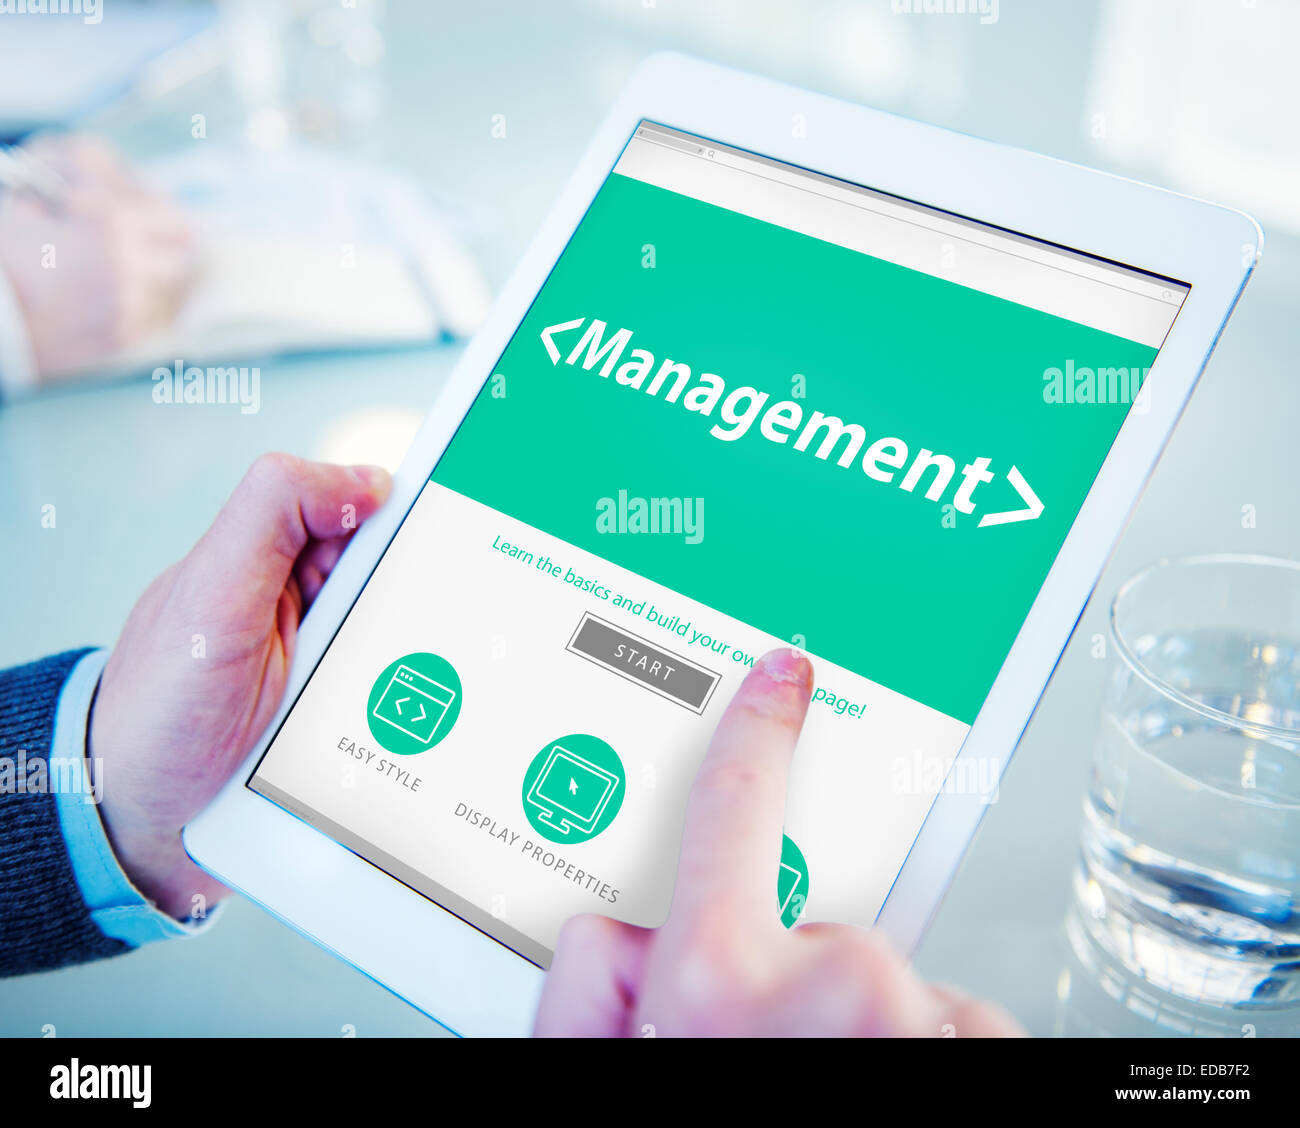 Management Planning Leader Manager Organization Concepts Stock Photo